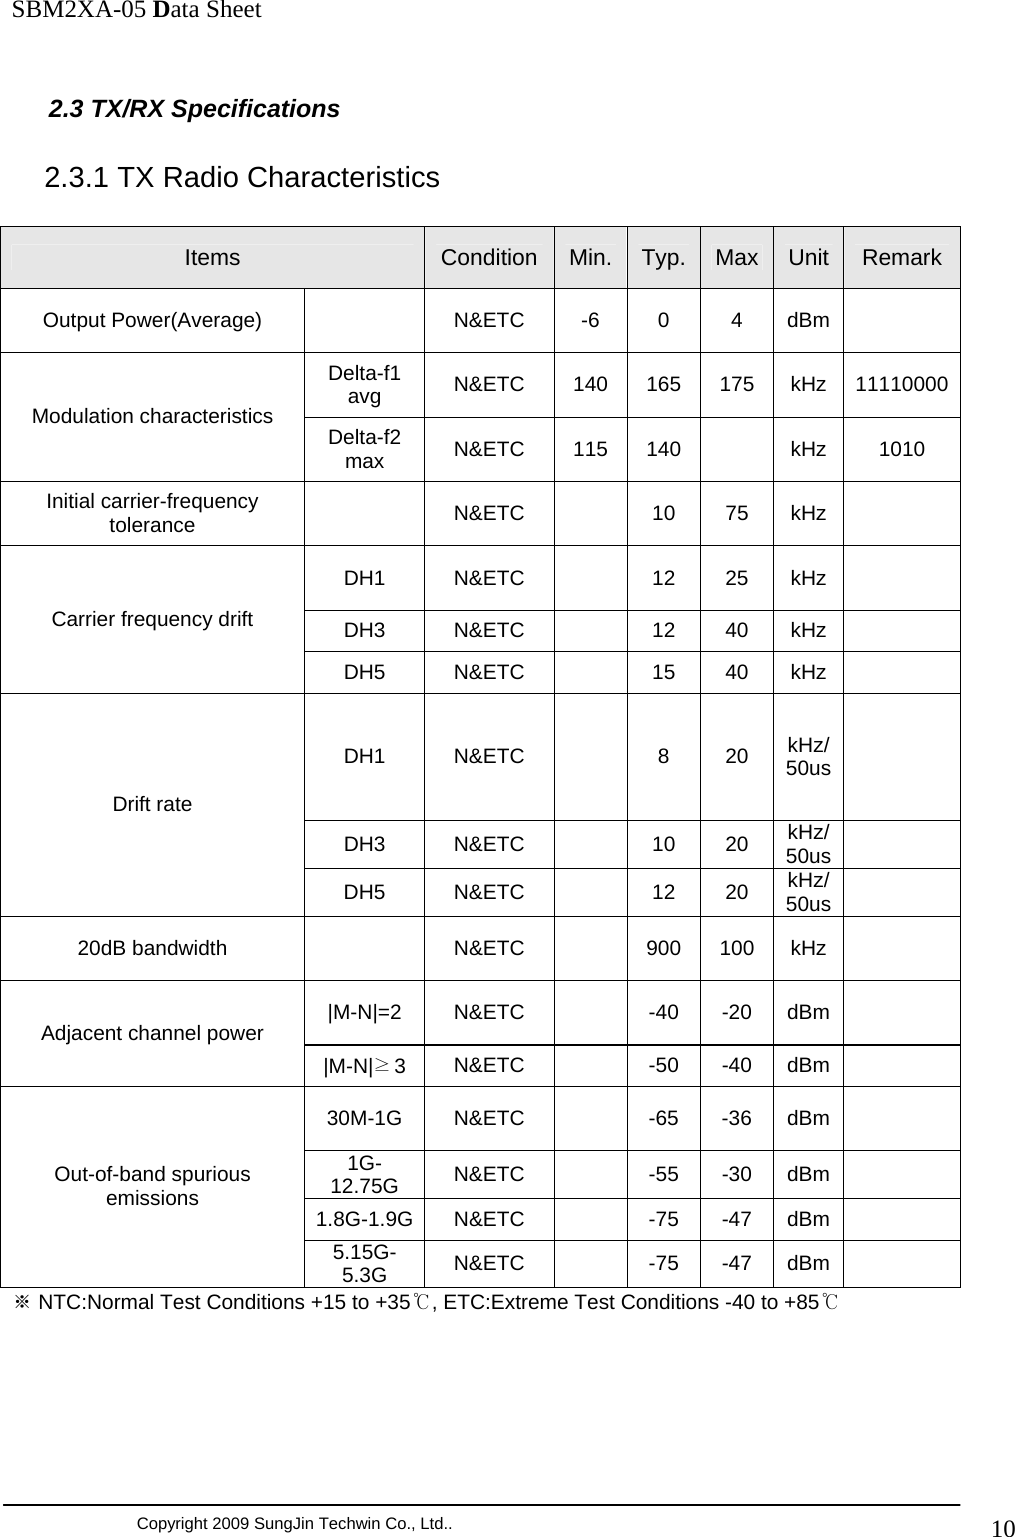               SBM2XA-05 Data Sheet  Copyright 2009 SungJin Techwin Co., Ltd..   10  2.3 TX/RX Specifications      2.3.1 TX Radio Characteristics  Items  Condition Min. Typ. Max  Unit  RemarkOutput Power(Average)    N&amp;ETC  -6  0  4  dBm   Delta-f1 avg  N&amp;ETC 140 165 175 kHz 11110000Modulation characteristics  Delta-f2 max  N&amp;ETC 115 140    kHz  1010 Initial carrier-frequency tolerance   N&amp;ETC  10 75 kHz  DH1 N&amp;ETC  12 25 kHz   DH3 N&amp;ETC  12 40 kHz   Carrier frequency drift DH5 N&amp;ETC  15 40 kHz   DH1 N&amp;ETC  8 20 kHz/50us   DH3 N&amp;ETC  10 20 kHz/50us   Drift rate DH5 N&amp;ETC  12 20 kHz/50us   20dB bandwidth    N&amp;ETC    900  100  kHz   |M-N|=2 N&amp;ETC    -40 -20 dBm   Adjacent channel power |M-N|≥3N&amp;ETC  -50 -40 dBm   30M-1G N&amp;ETC    -65 -36 dBm   1G-12.75G  N&amp;ETC  -55 -30 dBm   1.8G-1.9G N&amp;ETC  -75 -47 dBm   Out-of-band spurious emissions 5.15G-5.3G  N&amp;ETC  -75 -47 dBm   ※ NTC:Normal Test Conditions +15 to +35℃, ETC:Extreme Test Conditions -40 to +85℃  